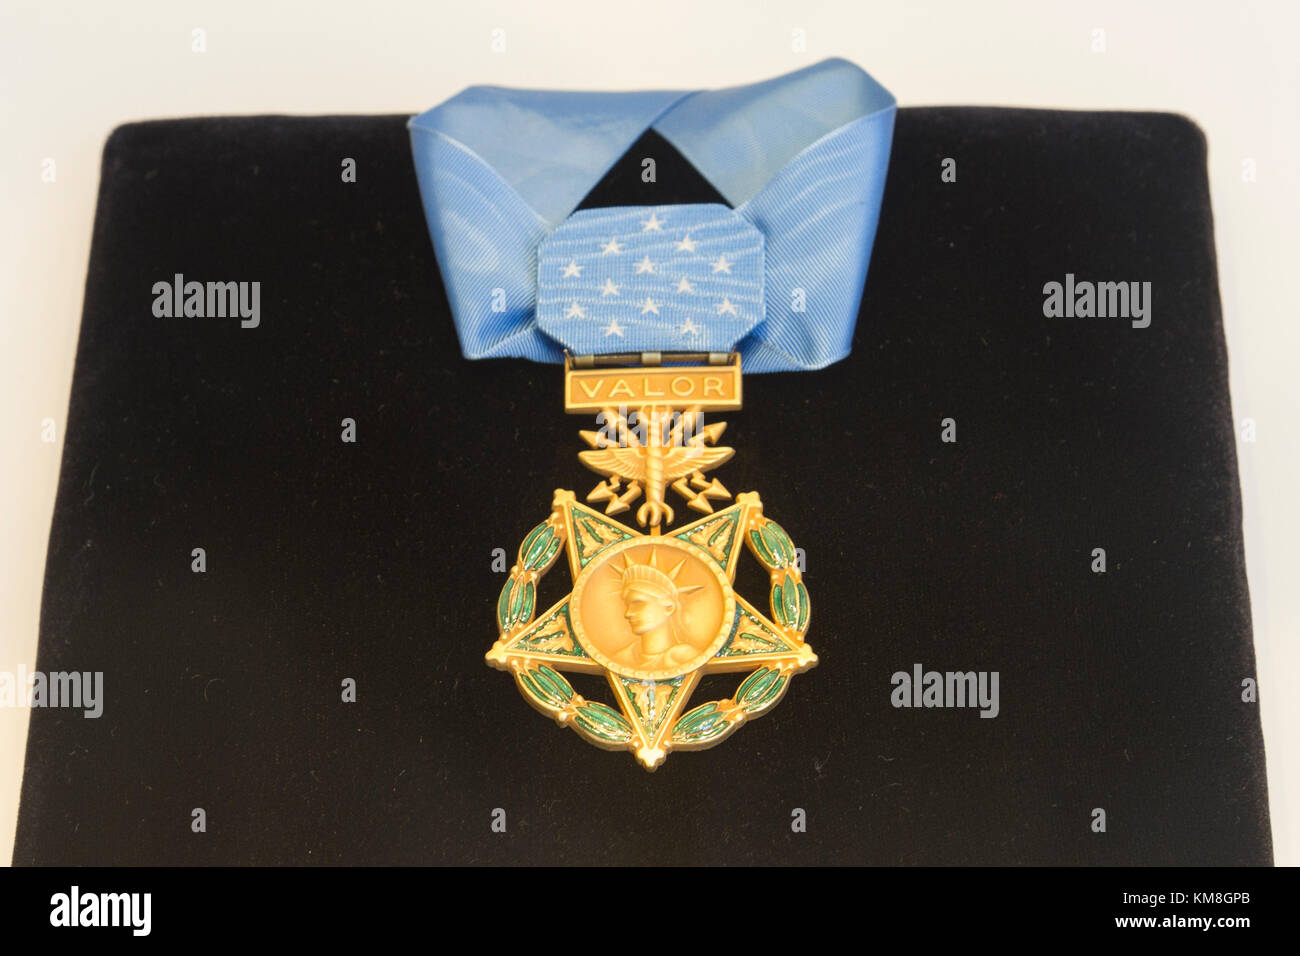 The Medal of Honor as presented to recipients from the US Air Force on display in Arlington National Cemetery, Virginia, United States. Stock Photo